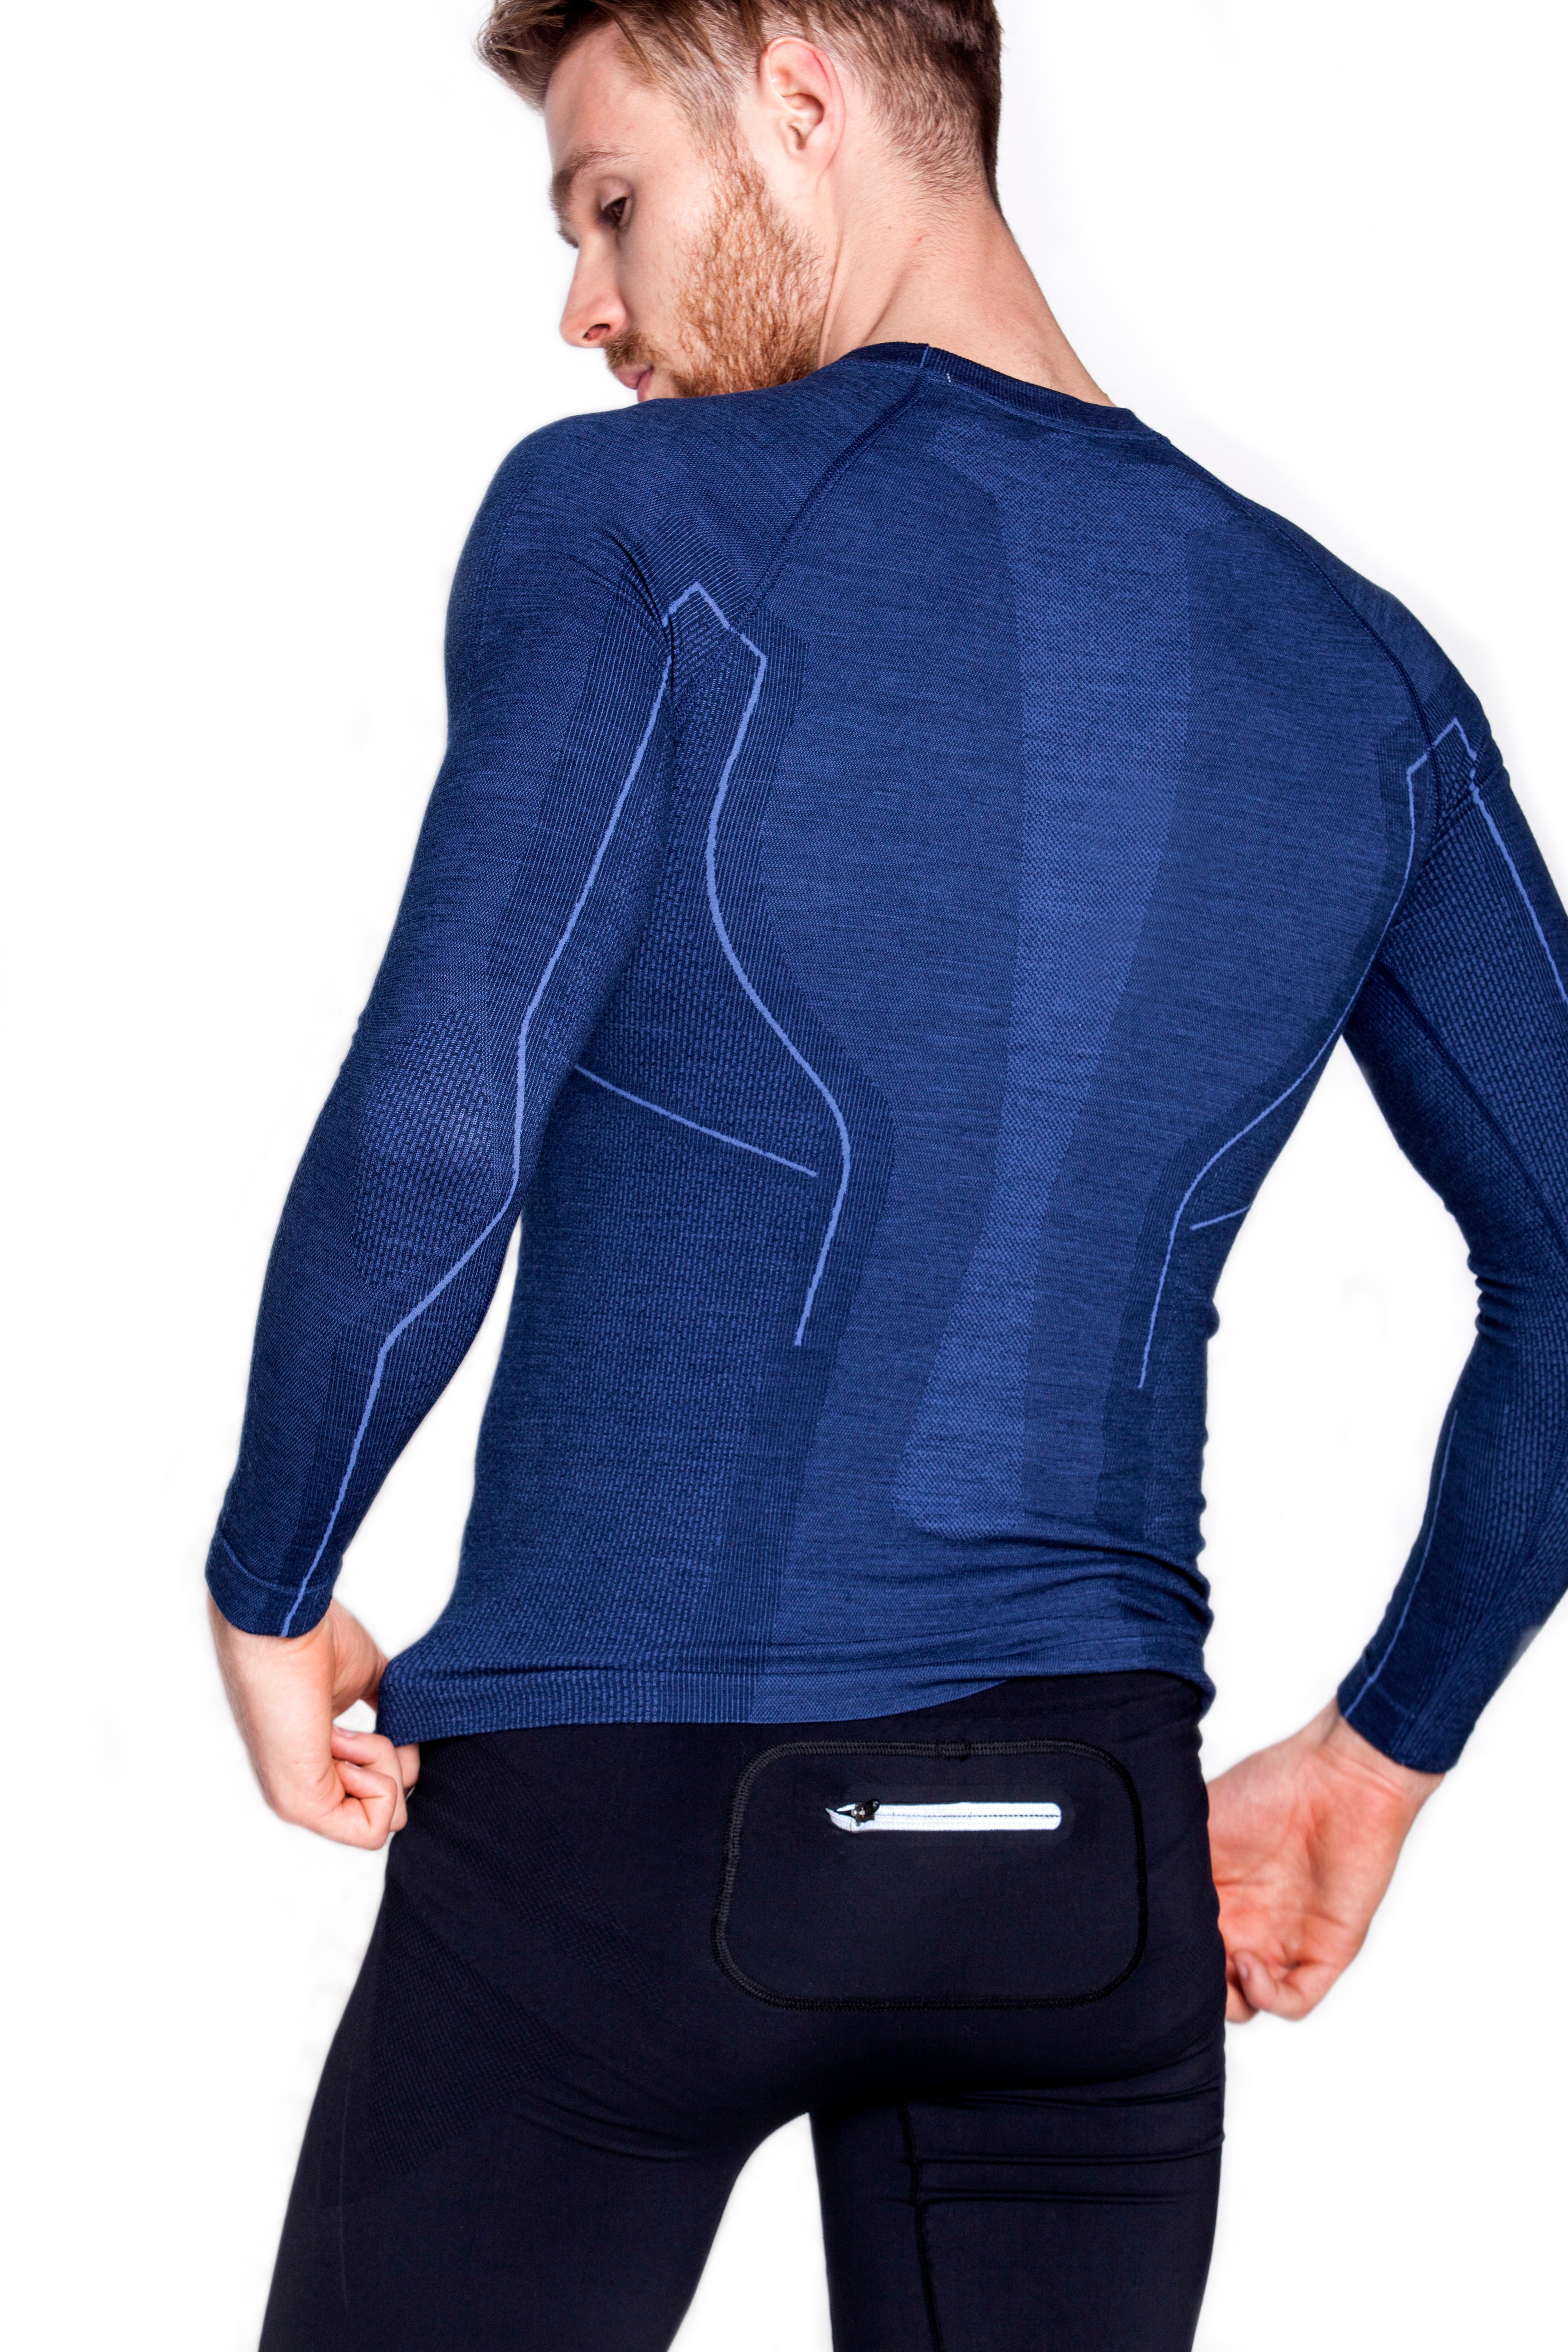 Men's navy blue ACTIVE WOOL long-sleeve shirt. Paired with black men's fitted cycling shorts. 